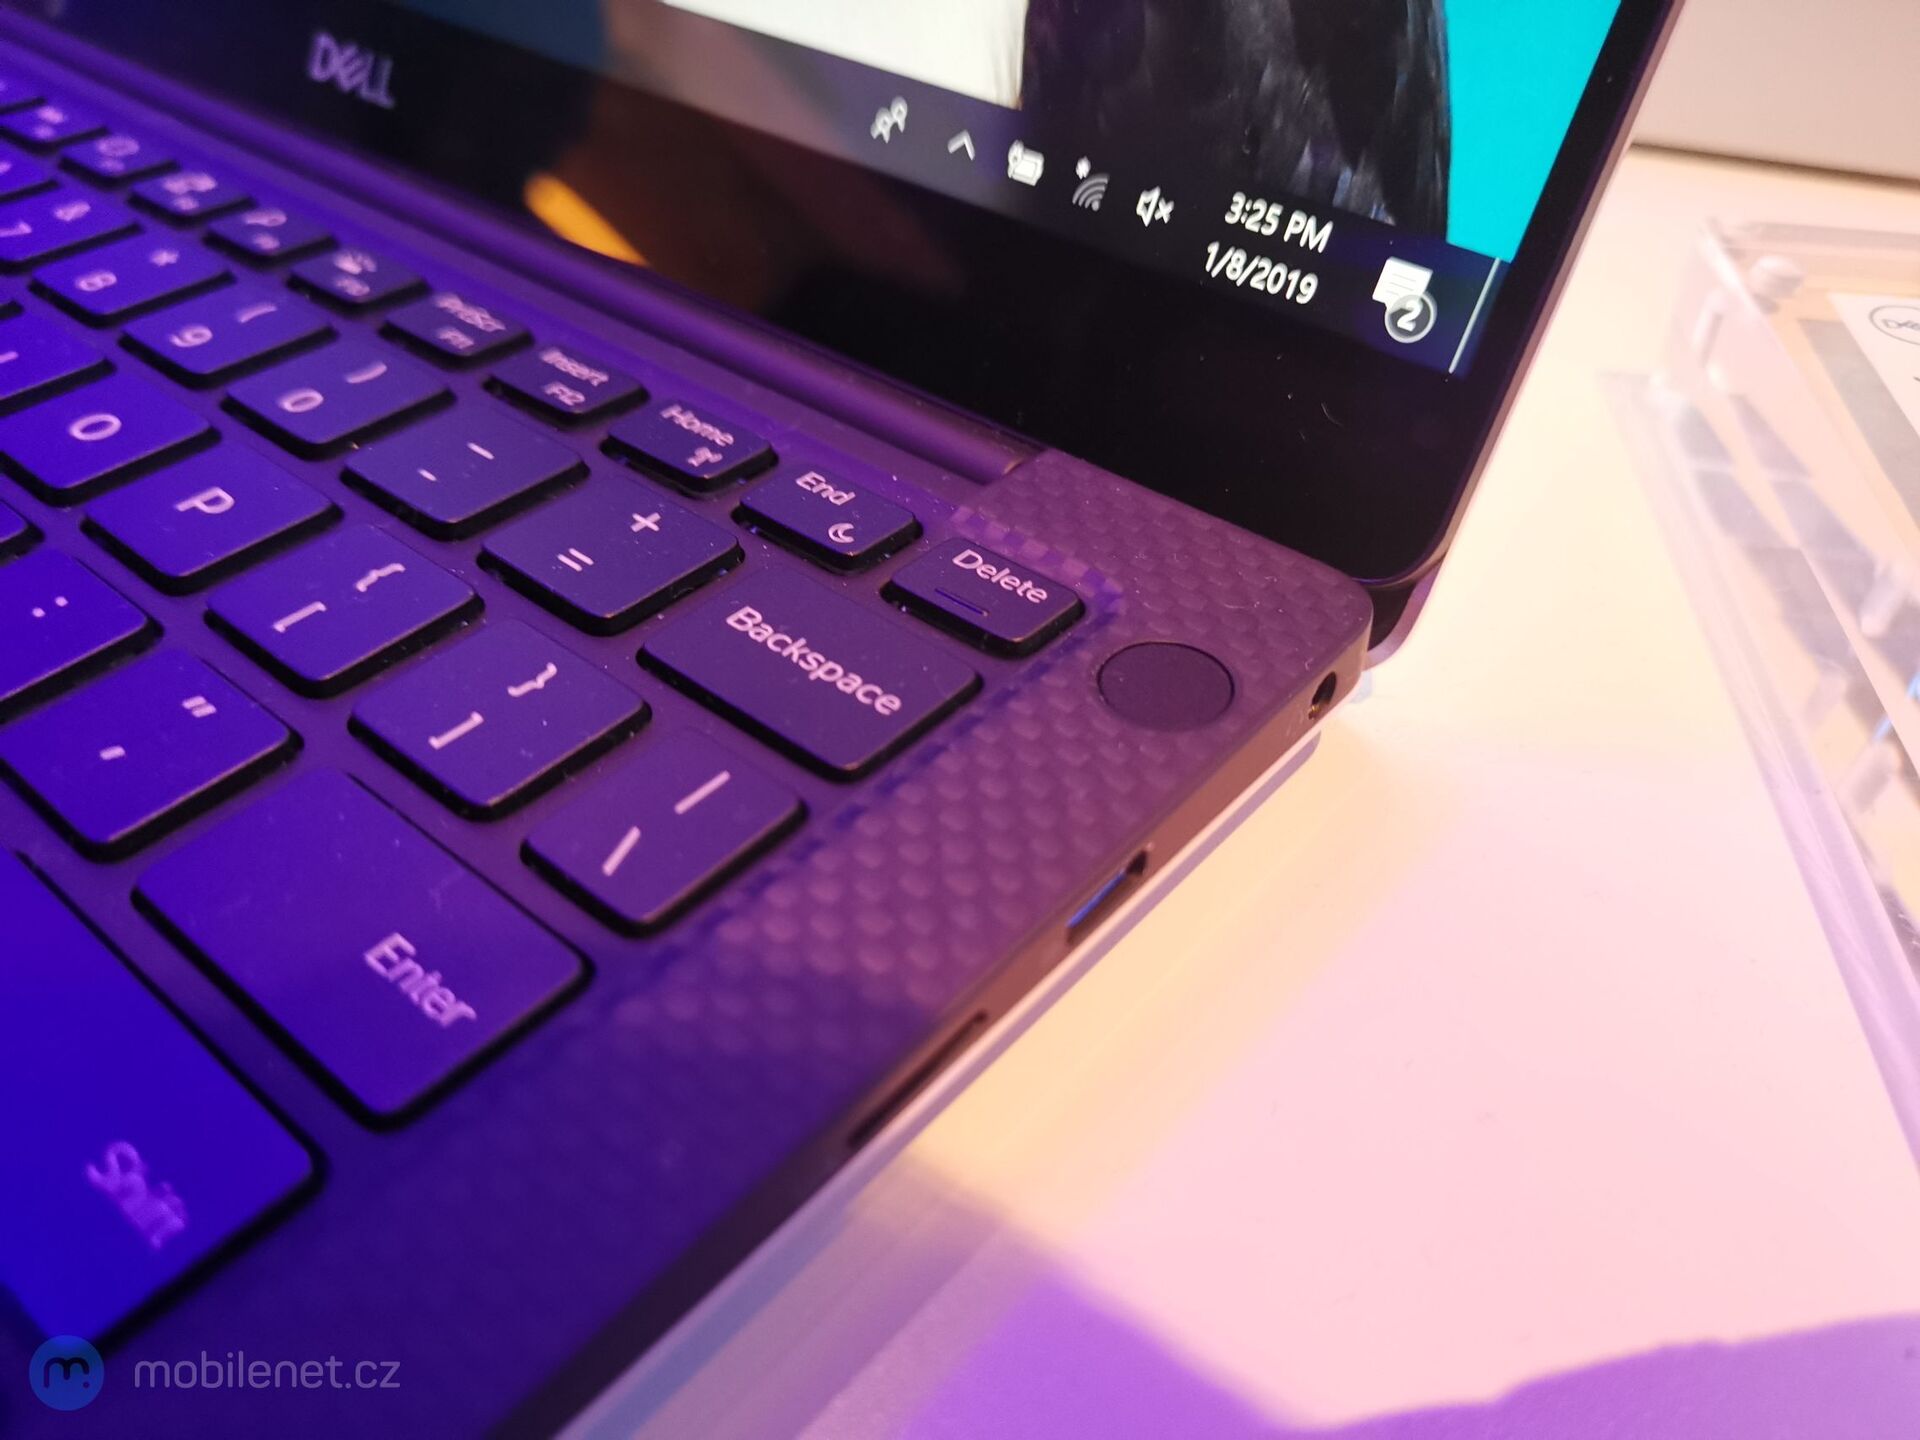 Dell XPS 13 (2019)